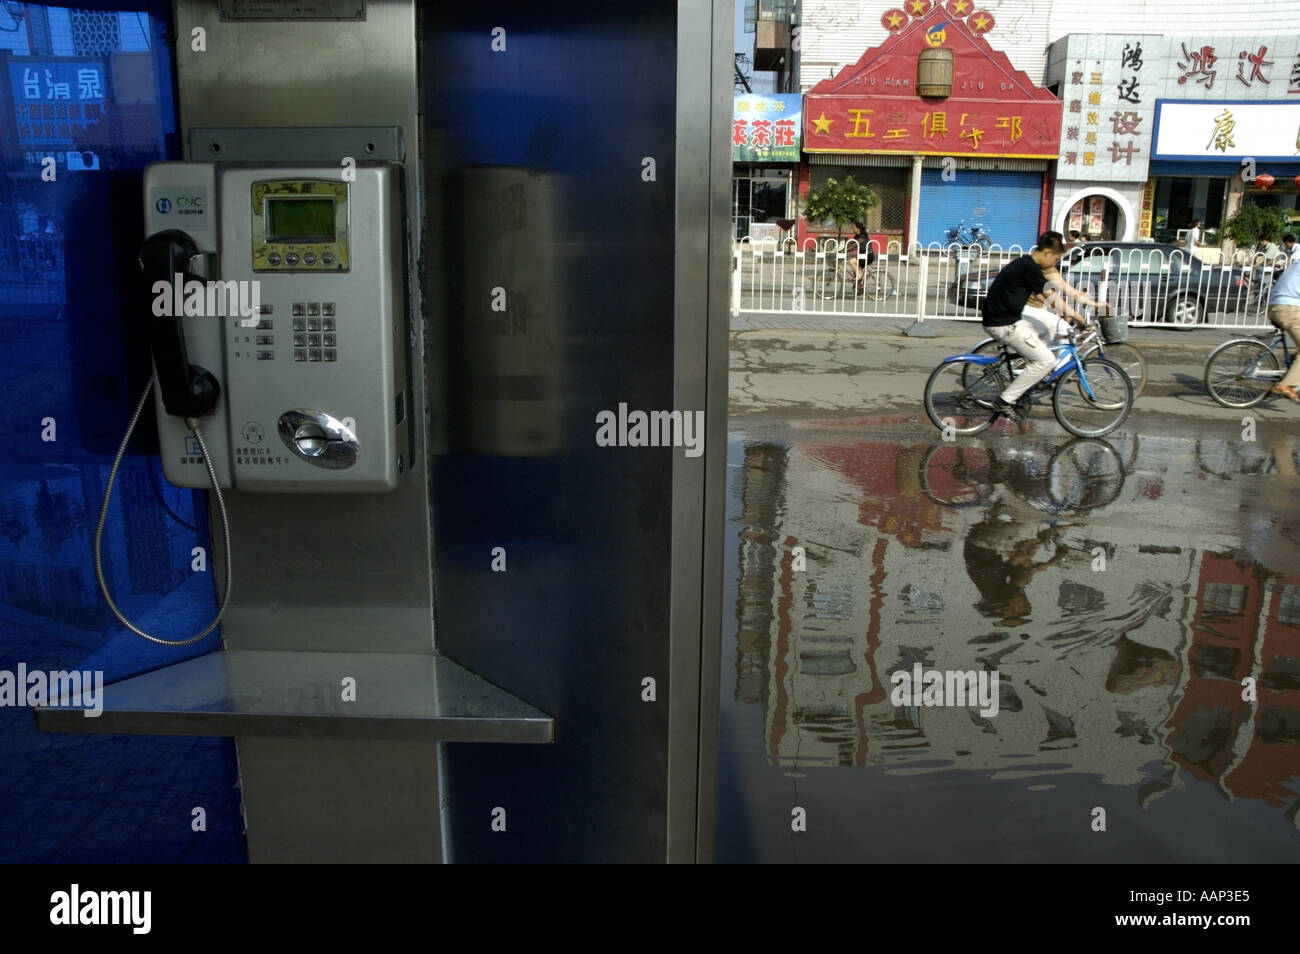 Public phone booth with people riding bicycles in the background, Datong, Shanxi, China. Stock Photo